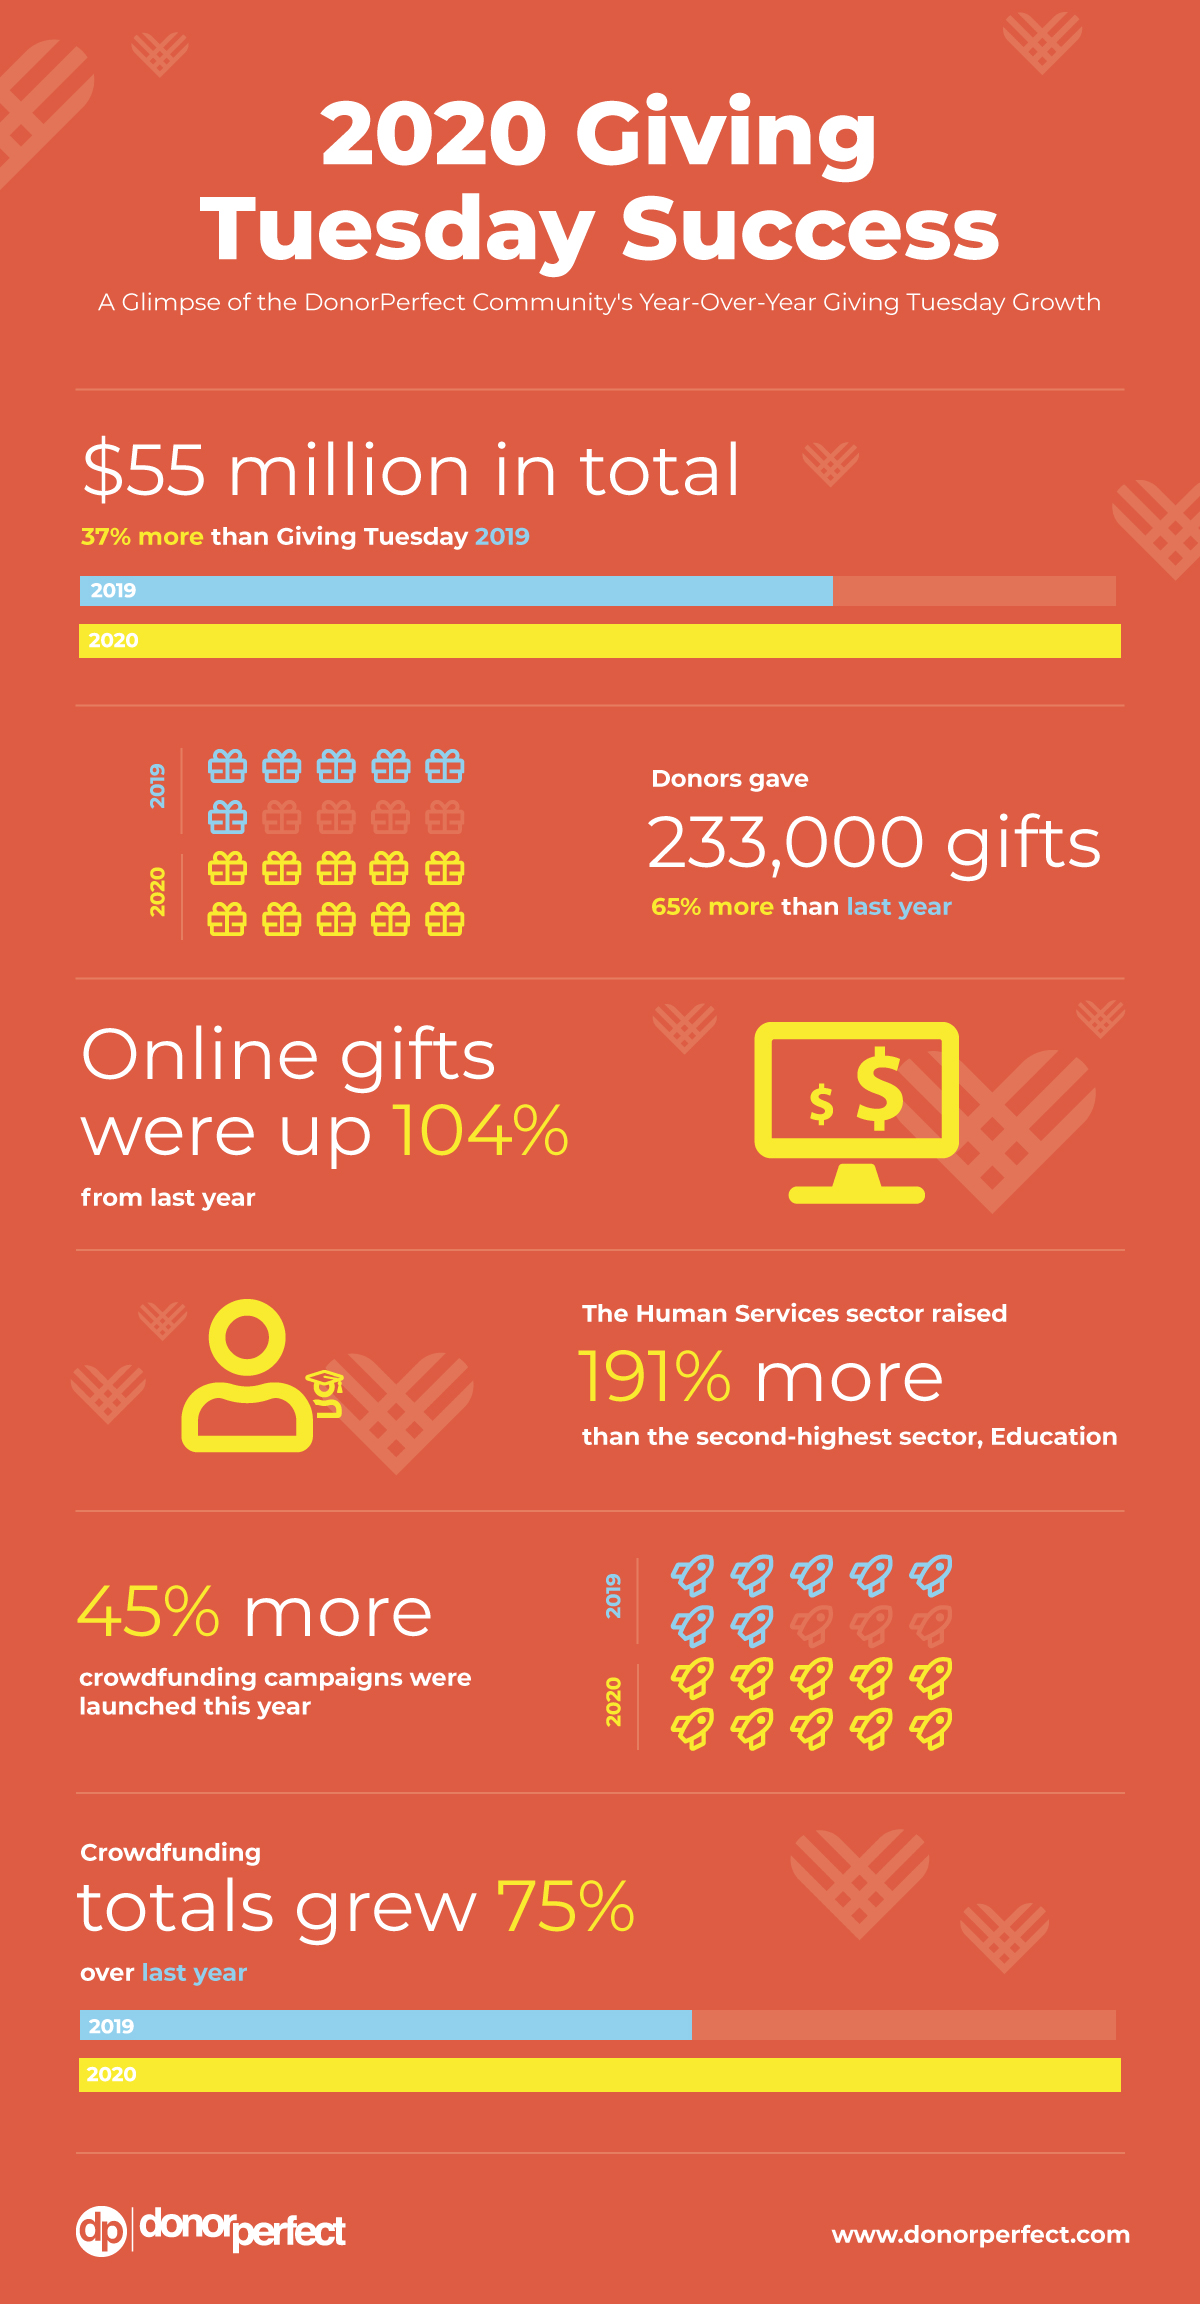 2020 GivingTuesday Results Report Infographic. Key Data shows 37% increase in total dollars raised and 65% increase in total donations made compared 2019.  Online giving was up 104% and donations to human services nonprofits were up 191%.  45% more crowdfunding campaigns were launched and crowdfunding raised 75% more on GivingTuesday 2020.